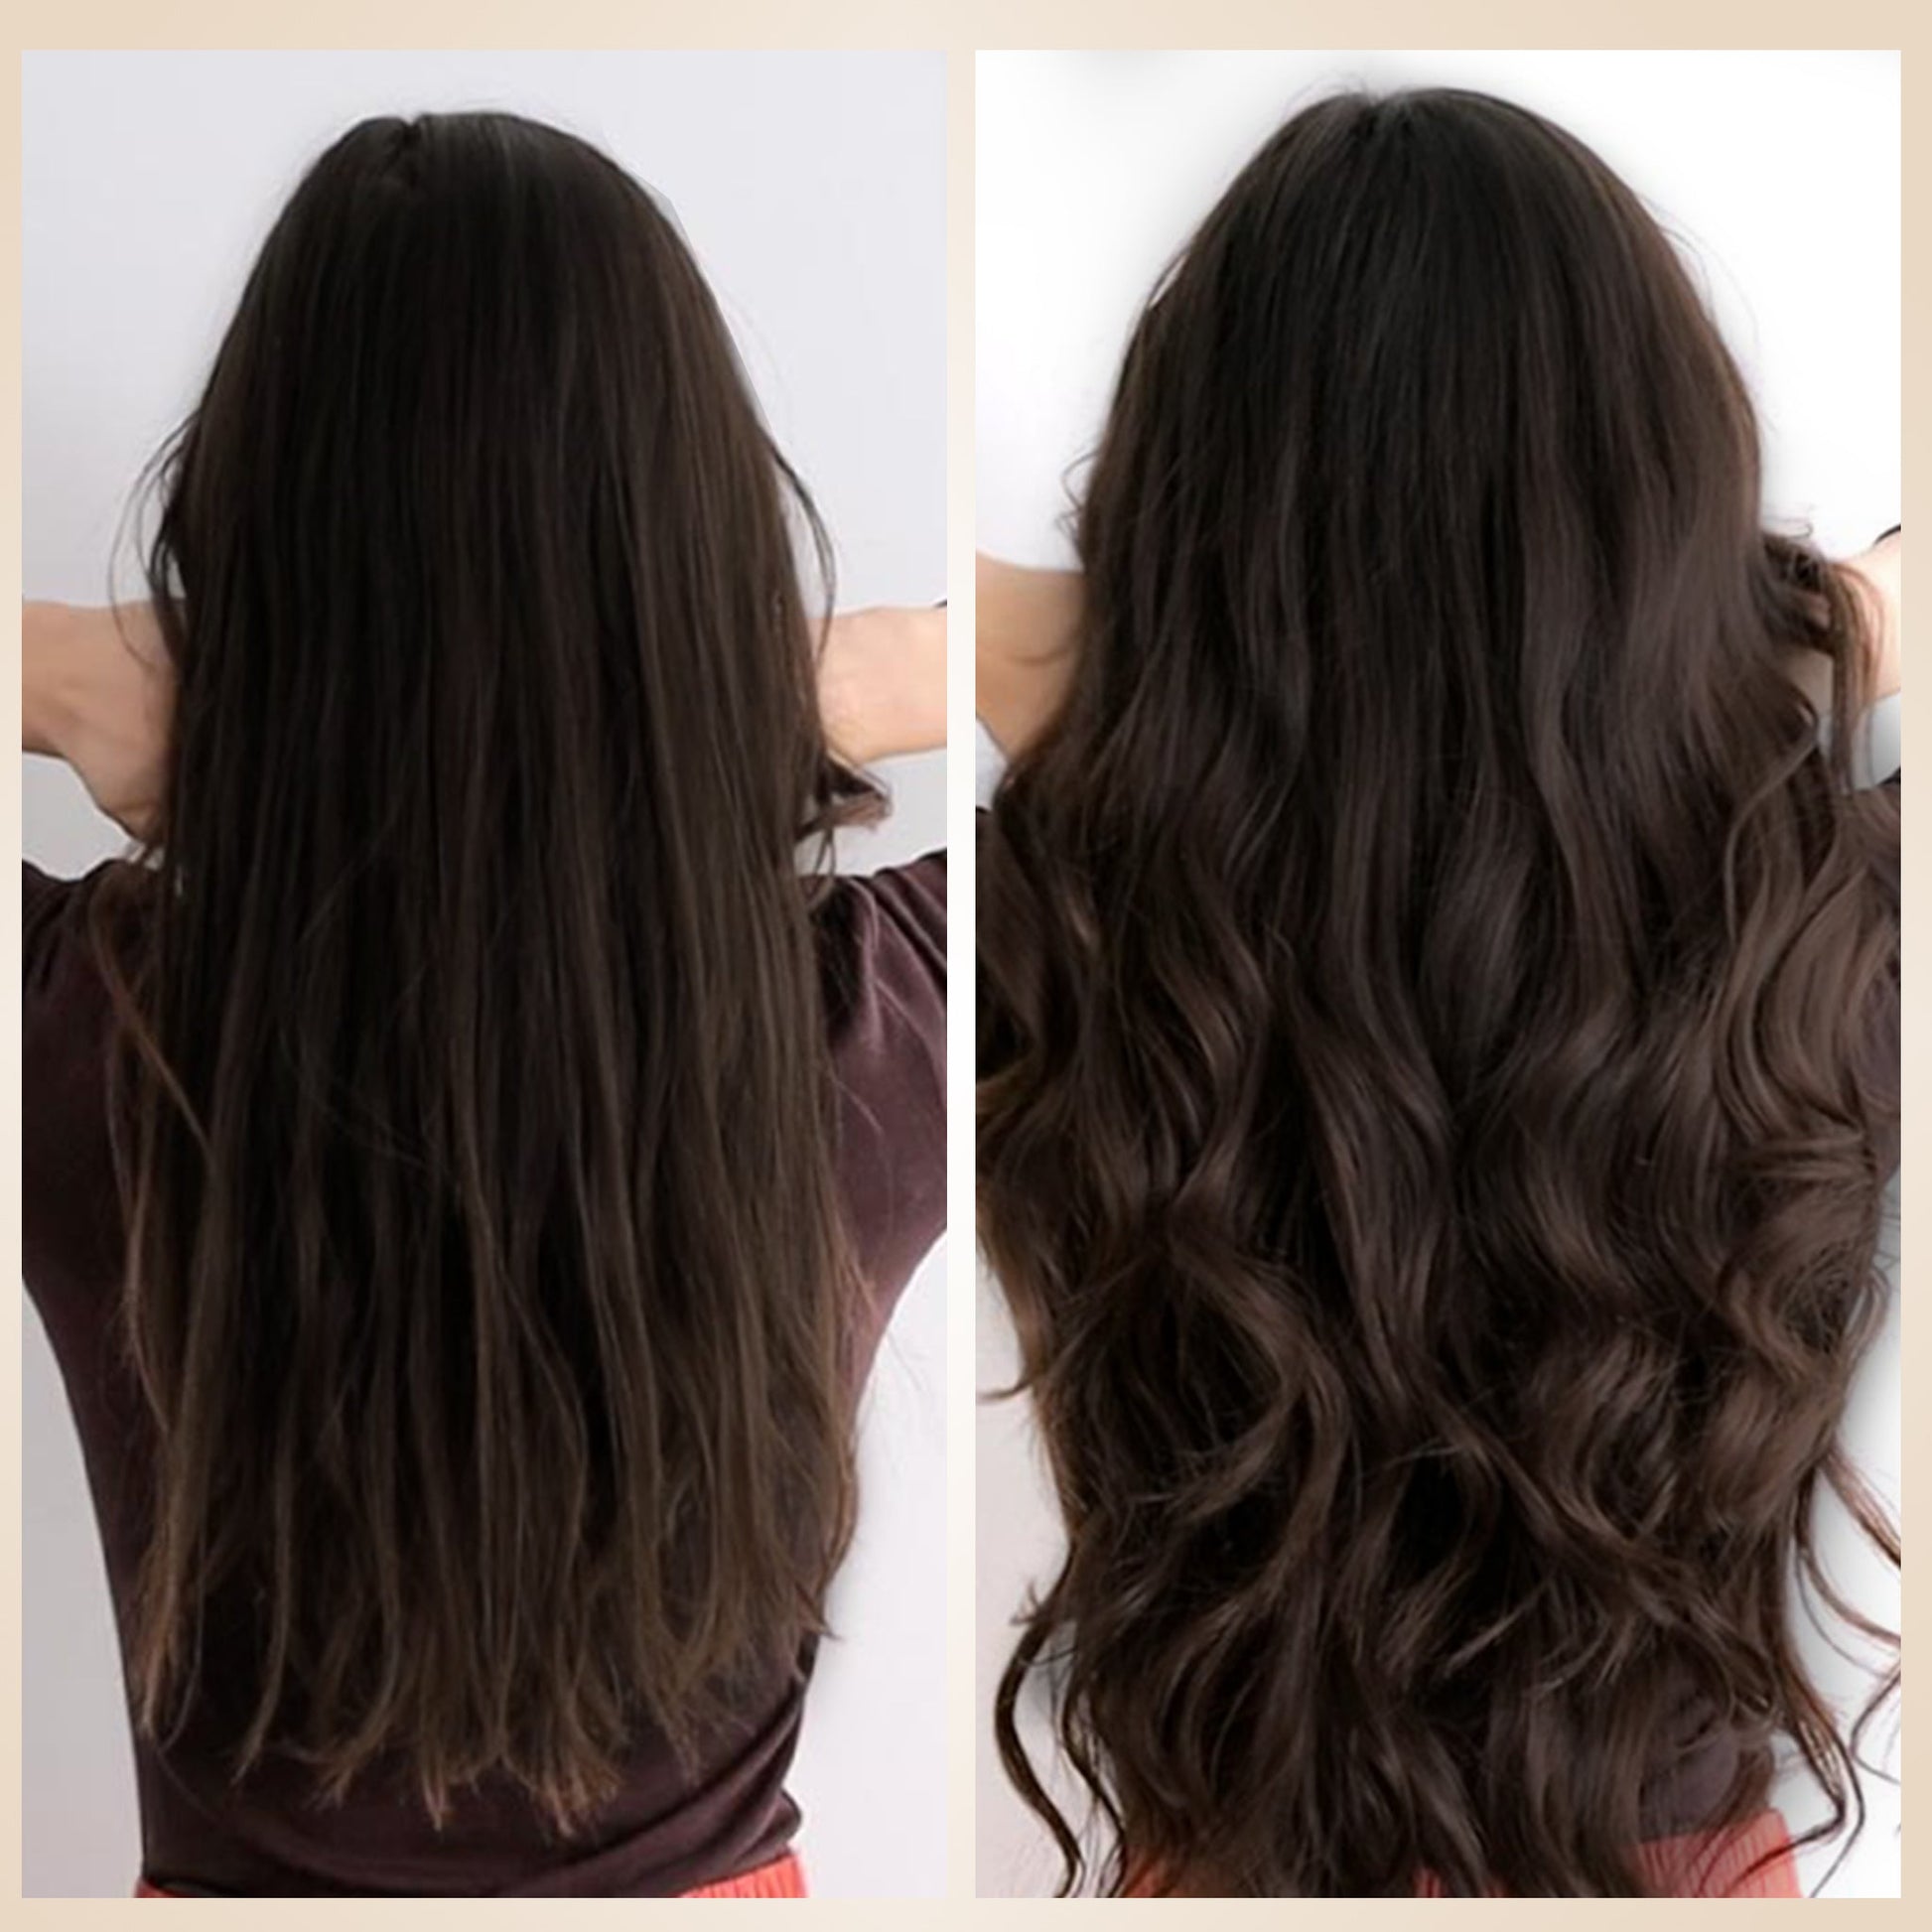 Lightweight Dark Brown Tape In Hair Extensions Invisible Weft 20 PCS segohair.com